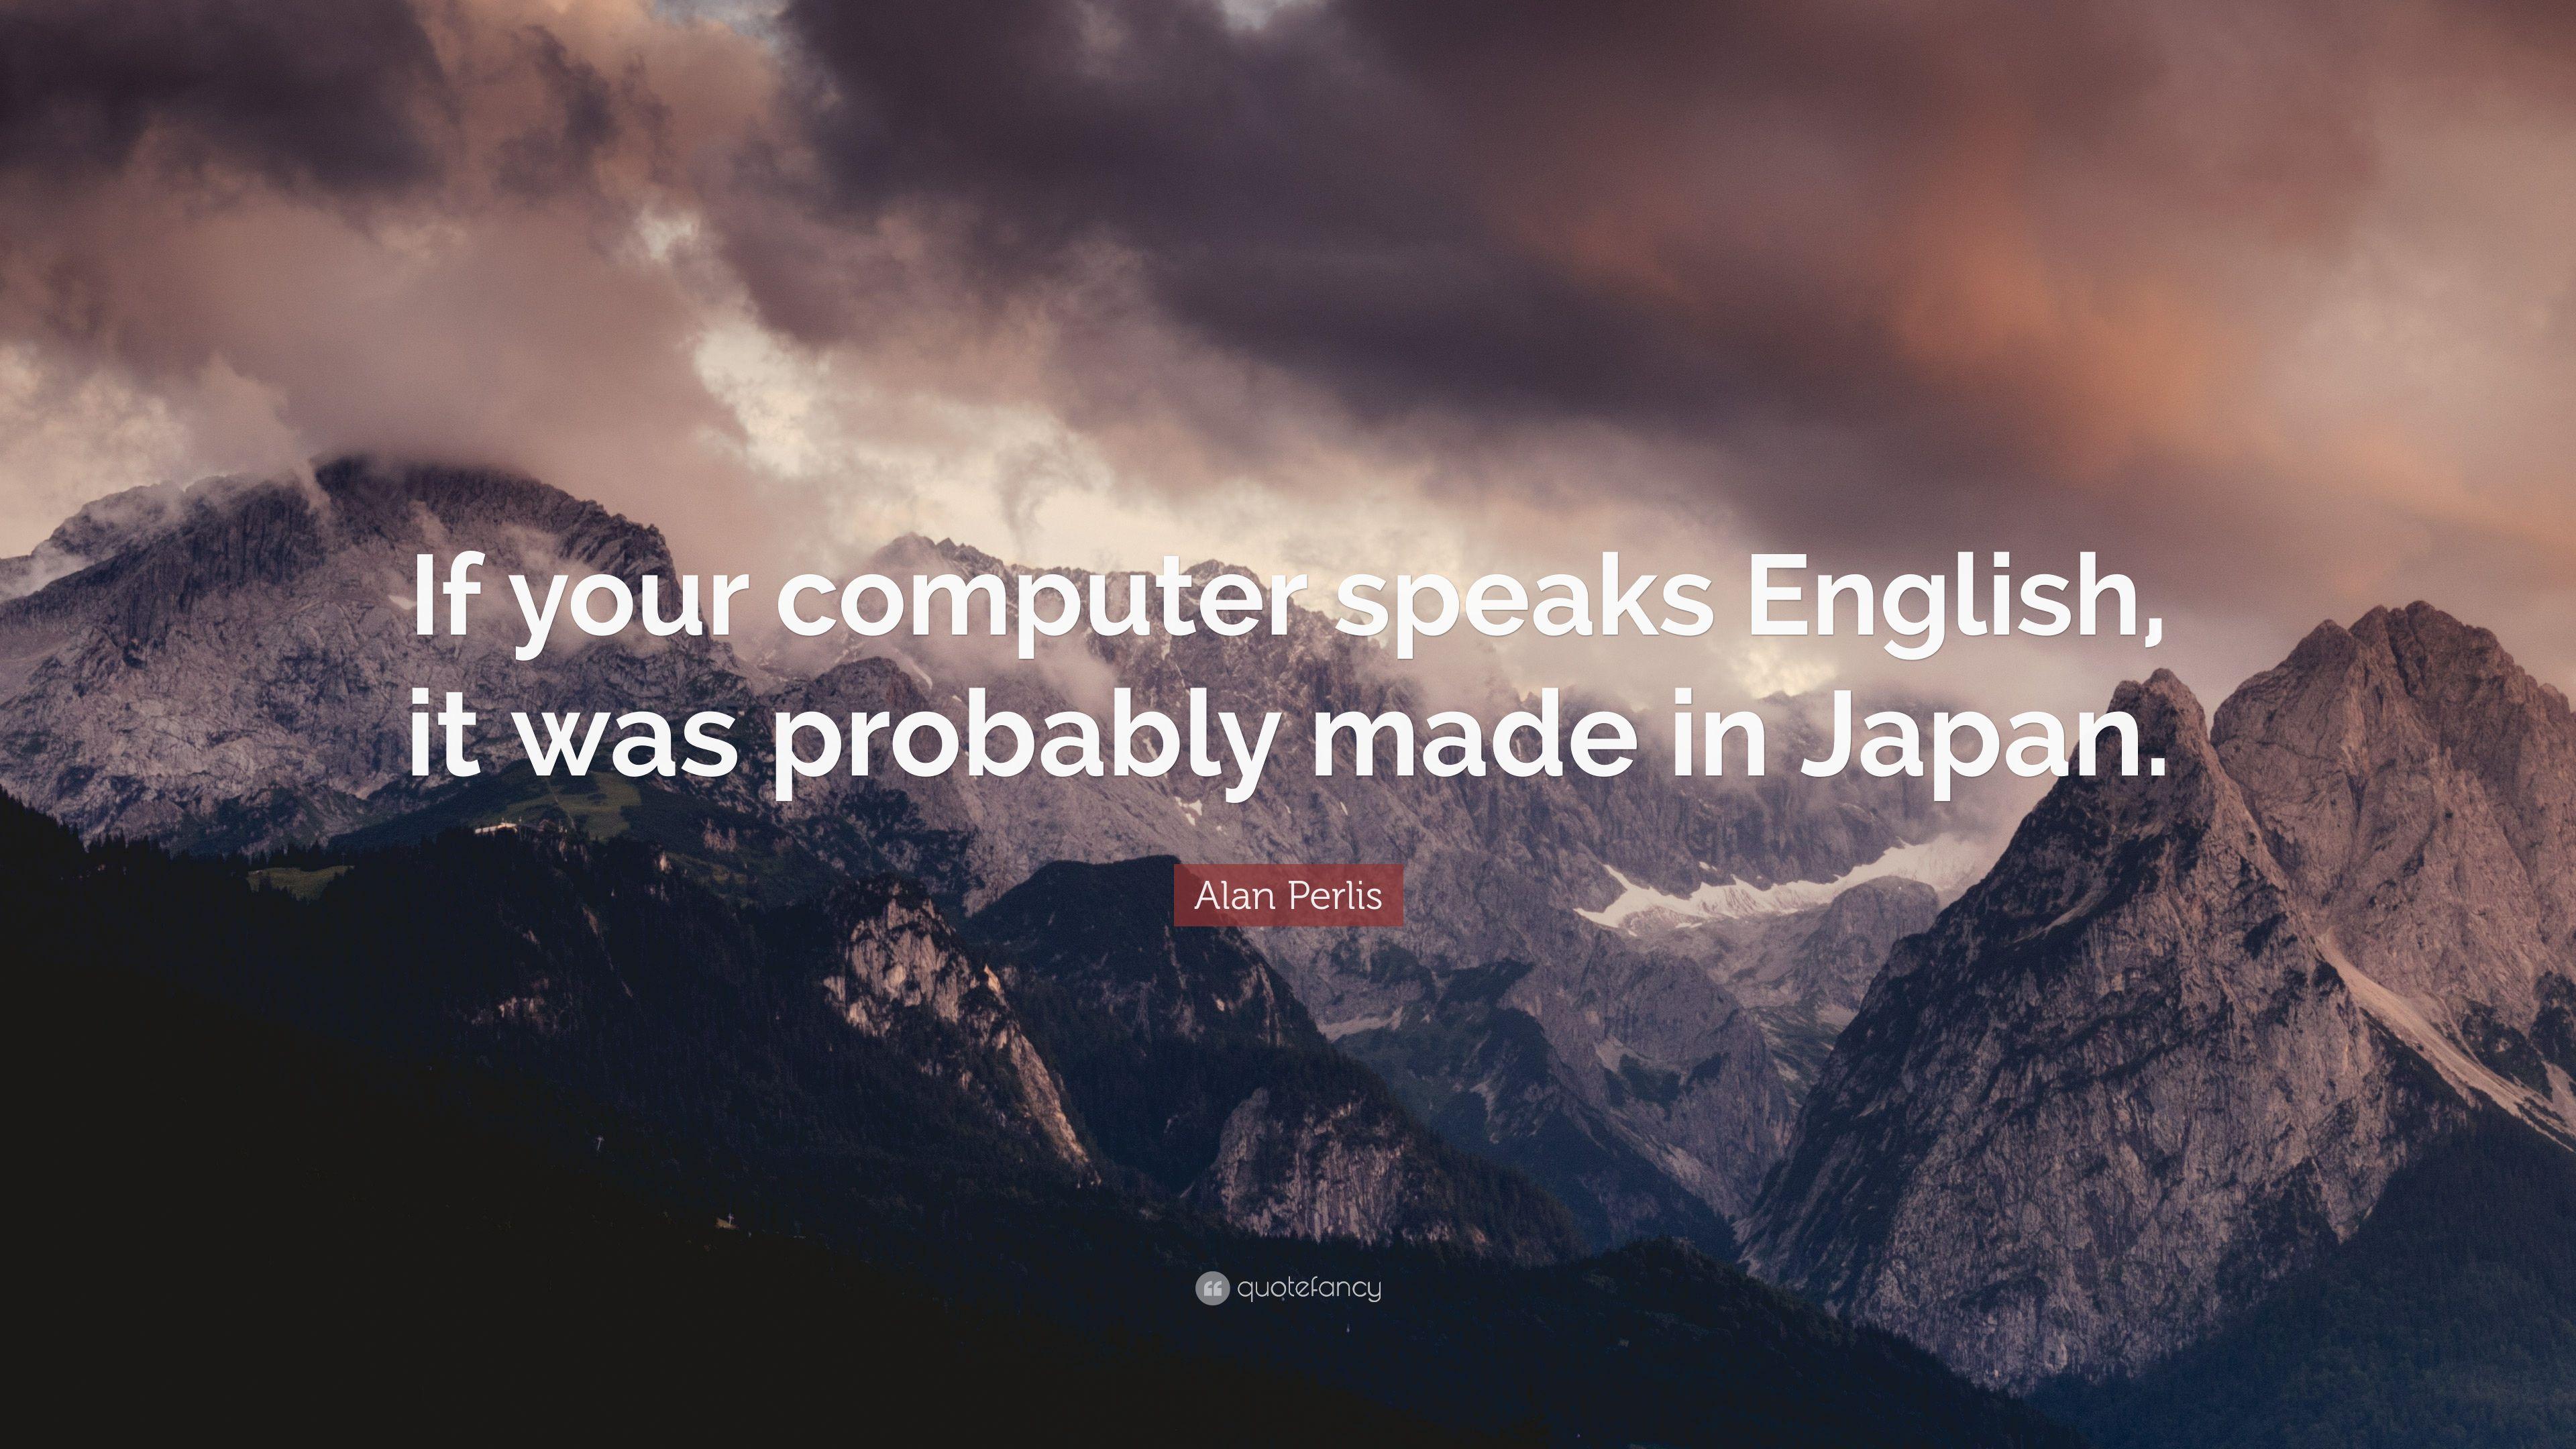 Alan Perlis Quote: “If your computer speaks English, it was probably